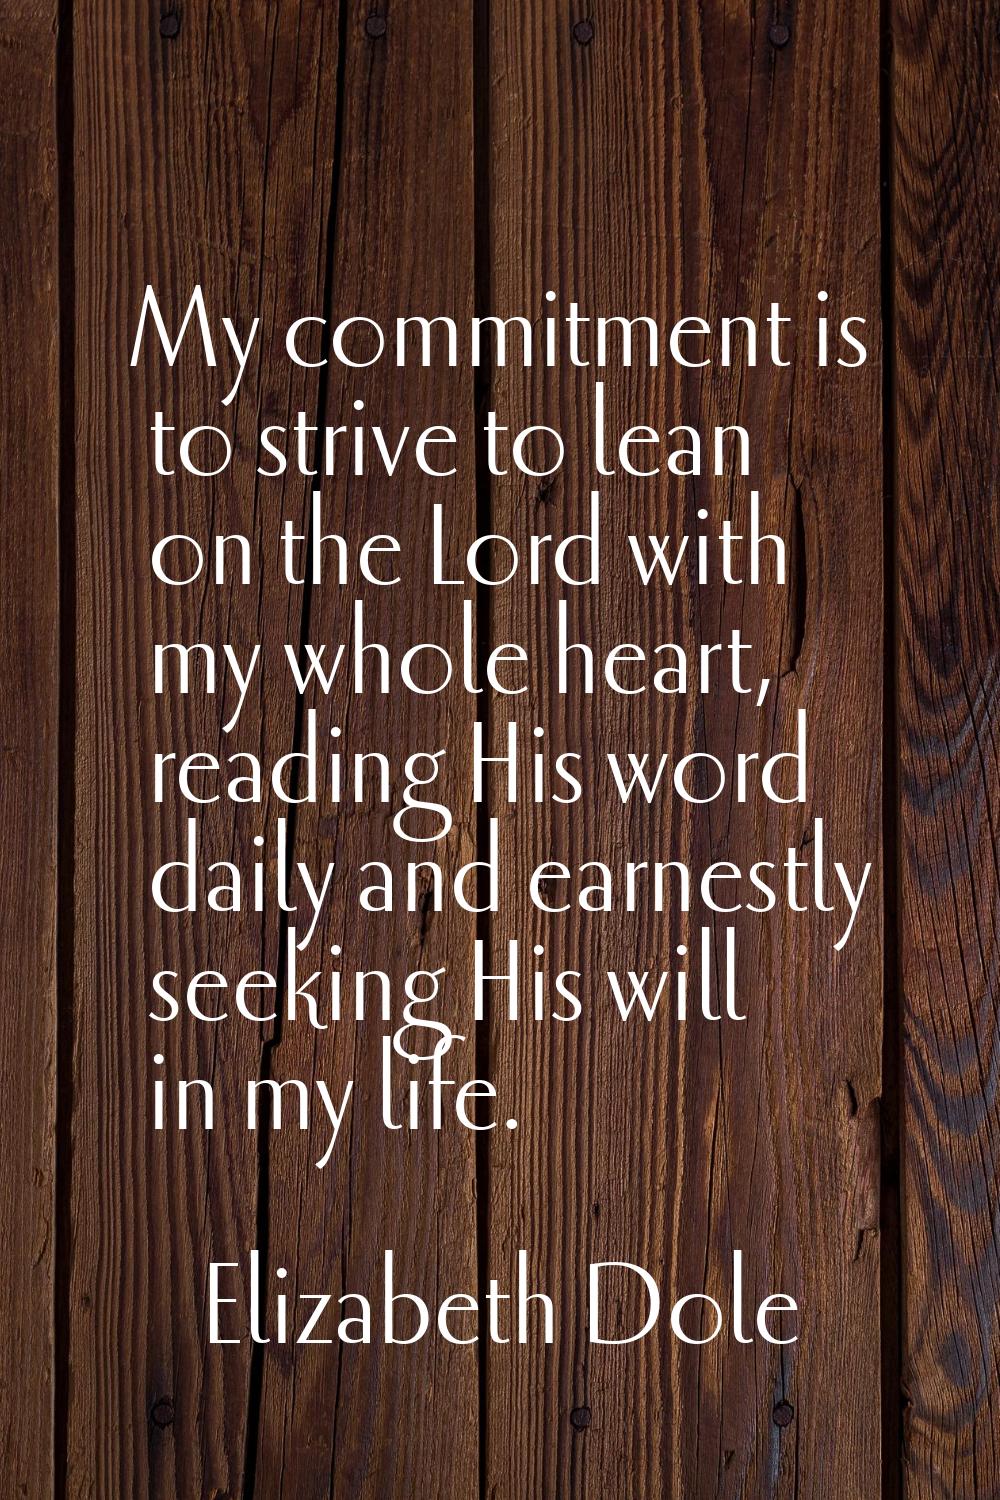 My commitment is to strive to lean on the Lord with my whole heart, reading His word daily and earn